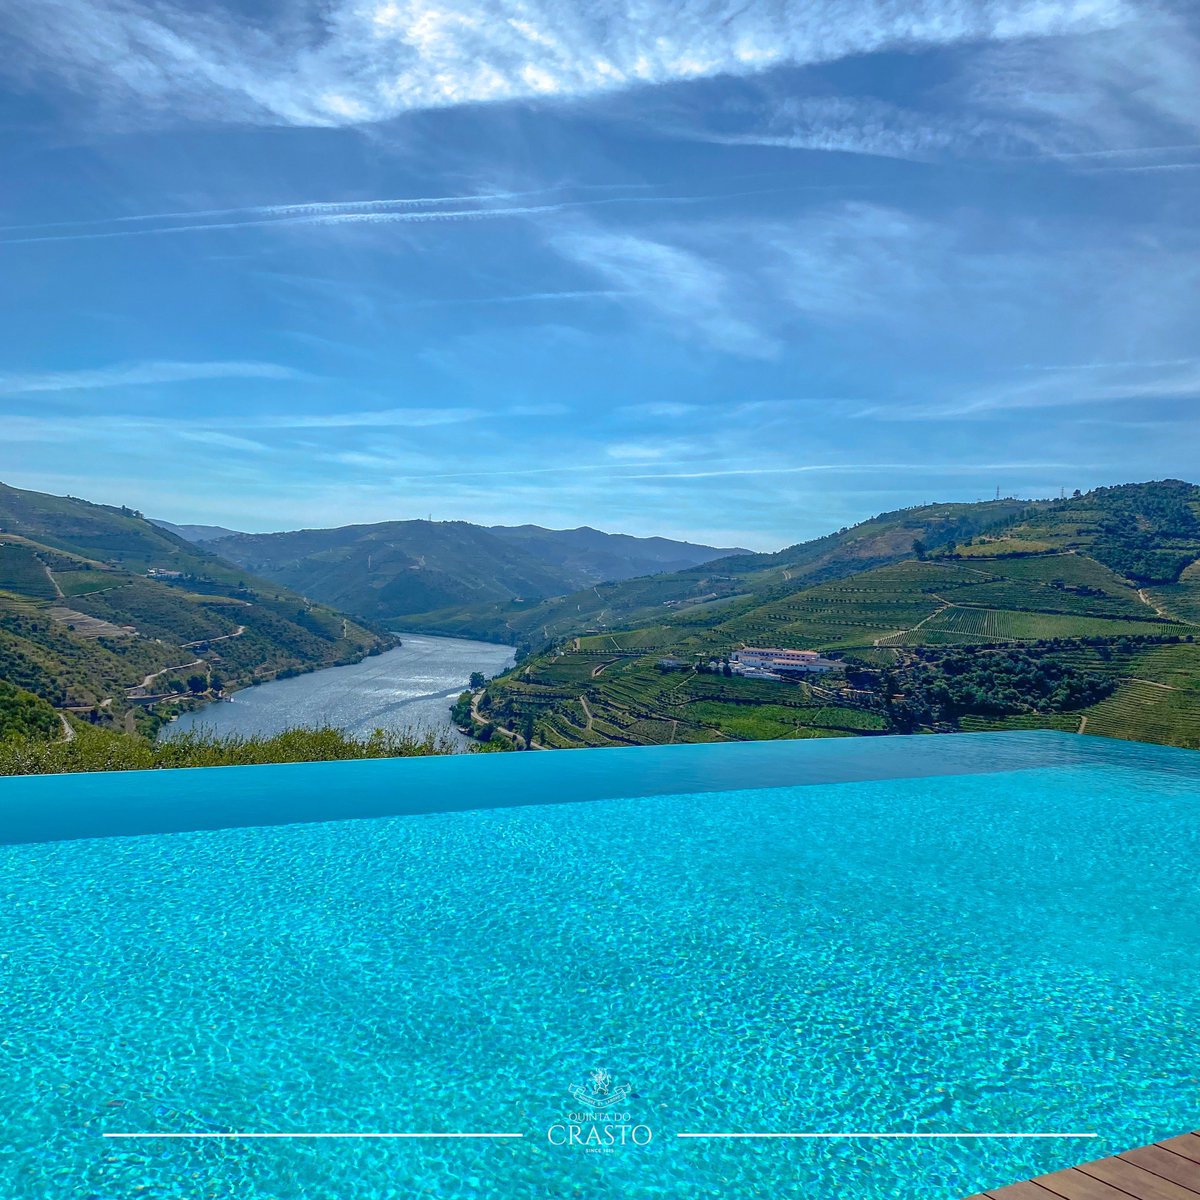 In the #Douro region, there are many infinite blues... 🙌🏼✨👉🏼 To make a reservation or for more information, please contact our #WineTourism Department via email enoturismo@quintadocrasto.pt. 😉 #Travel  #DouroWines #QuintadoCrasto #Crasto #Vegan #Vinhos #Wines #Wein #Weine #Vins